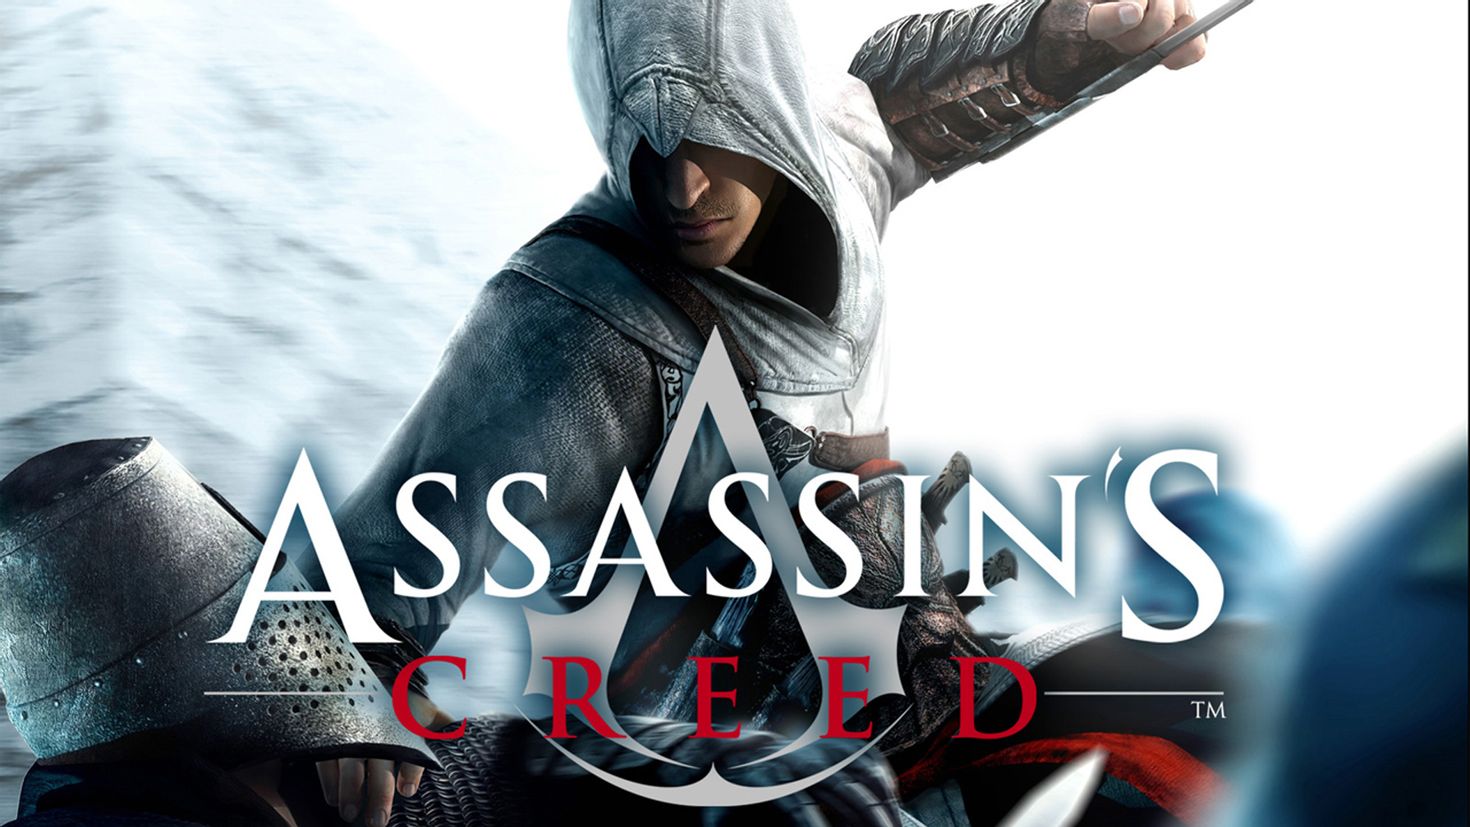 Steam assassin creed 2 deluxe фото 108